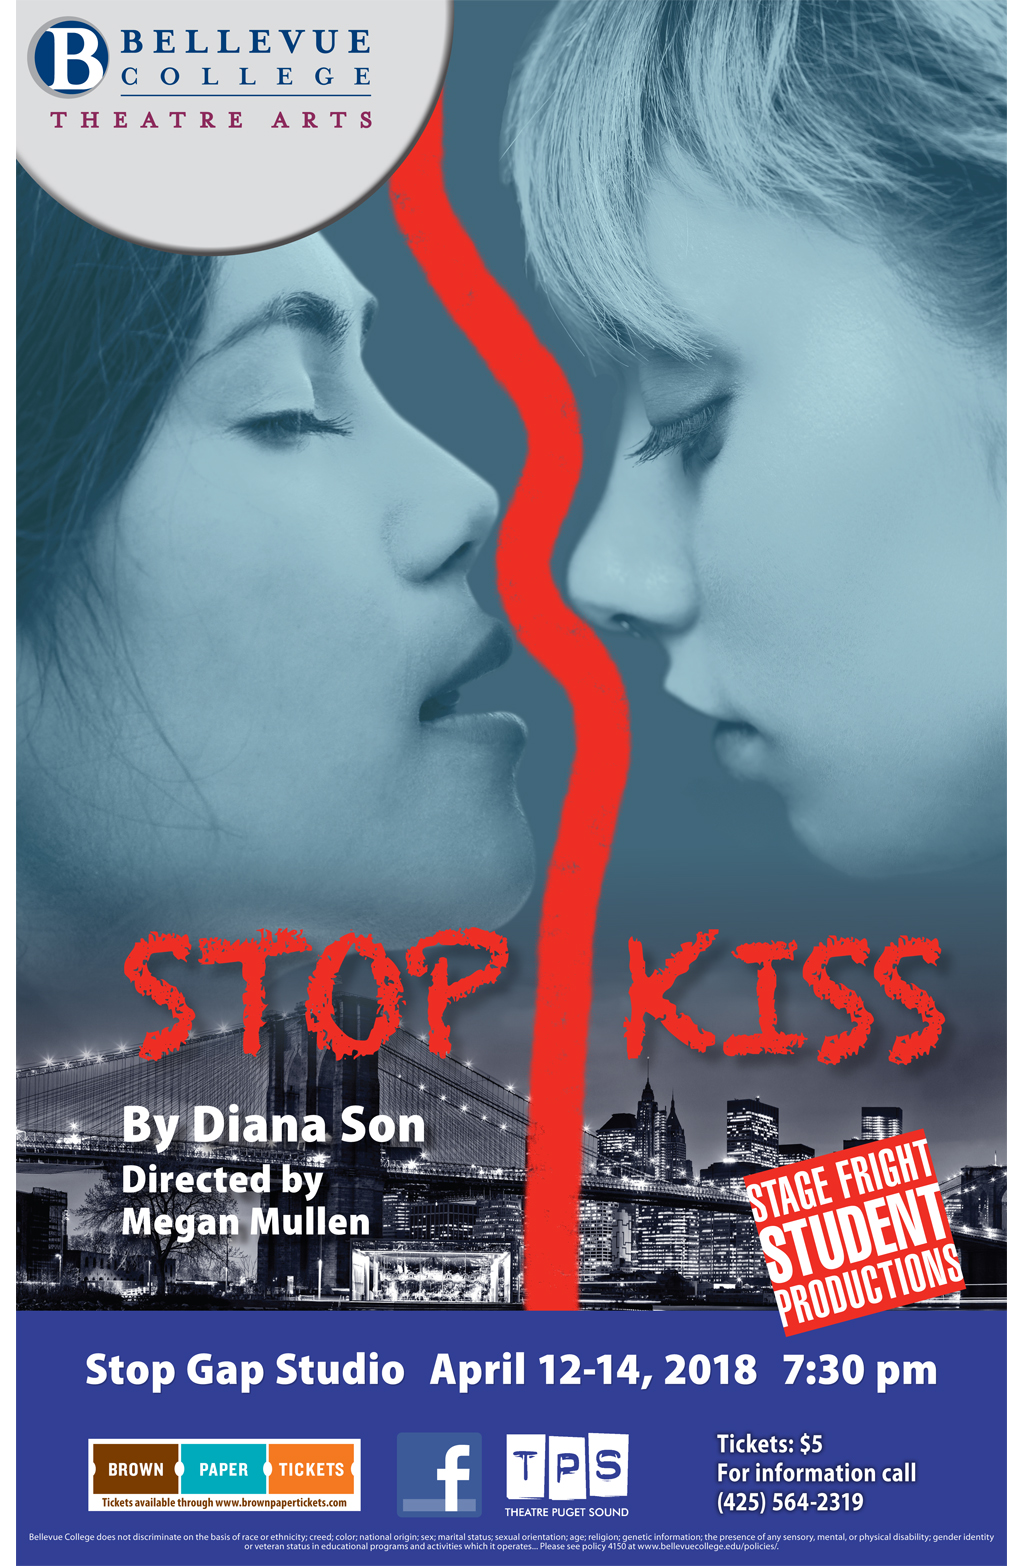 Poster promoting a student play at Bellevue College